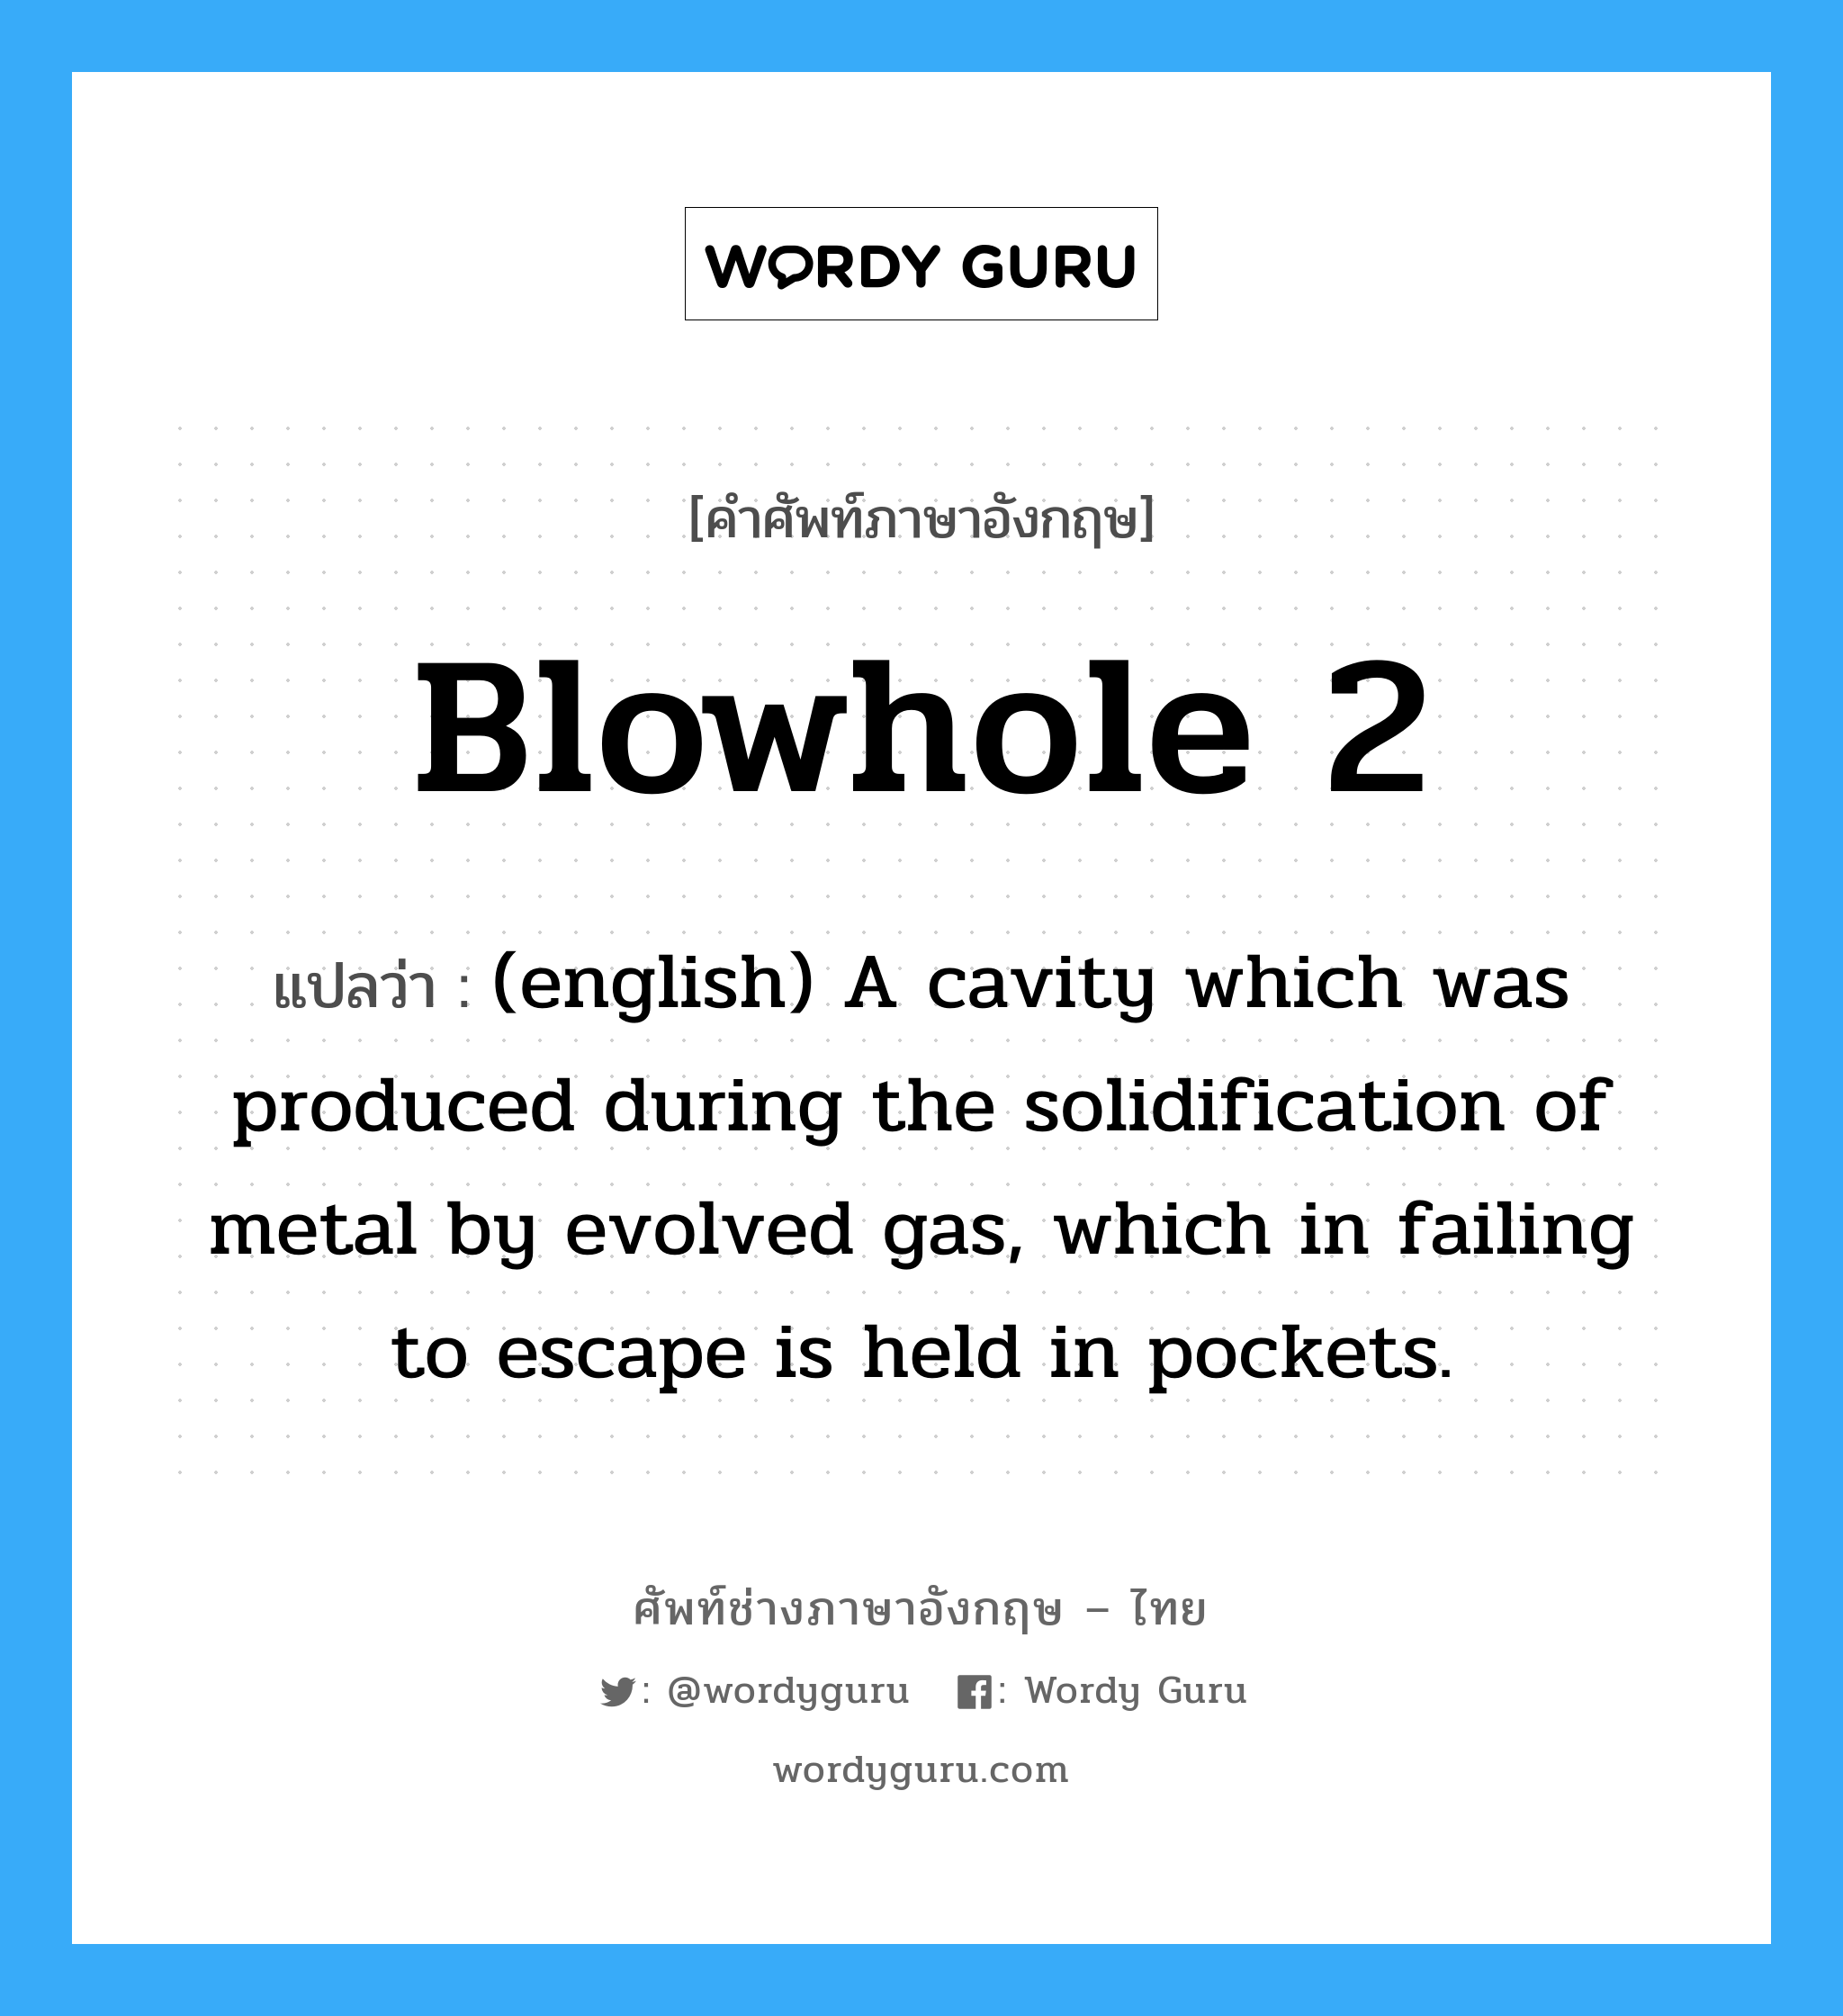 (english) A cavity which was produced during the solidification of metal by evolved gas, which in failing to escape is held in pockets. ภาษาอังกฤษ?, คำศัพท์ช่างภาษาอังกฤษ - ไทย (english) A cavity which was produced during the solidification of metal by evolved gas, which in failing to escape is held in pockets. คำศัพท์ภาษาอังกฤษ (english) A cavity which was produced during the solidification of metal by evolved gas, which in failing to escape is held in pockets. แปลว่า Blowhole 2